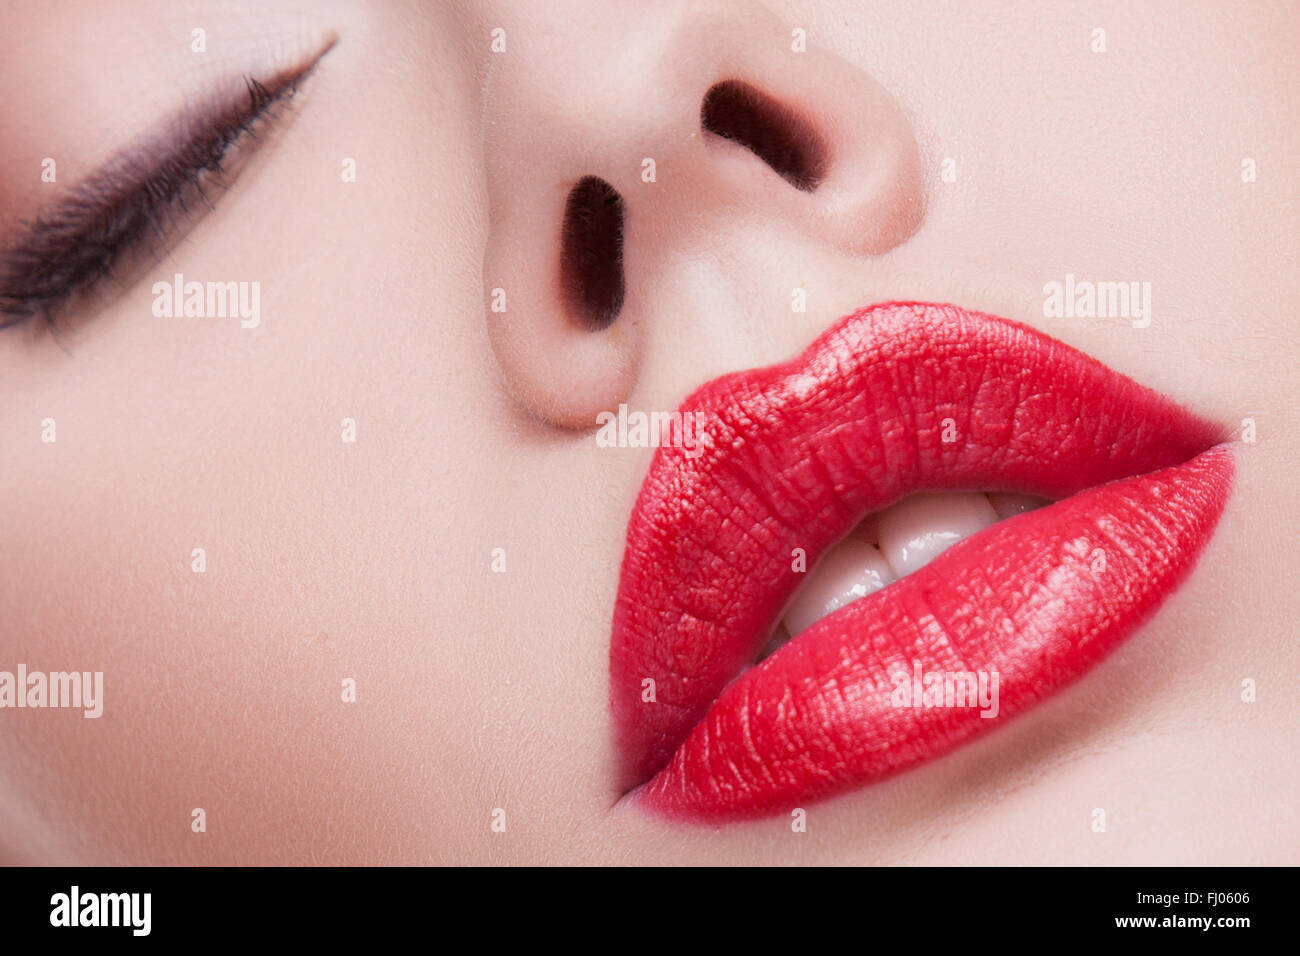 red Lip Gloss or lipstick. Moisturizing Lip Gloss red Color, light Texture. lips close-up, make-up, Twinkling Particles for the Volume and Beauty lips Stock Photo